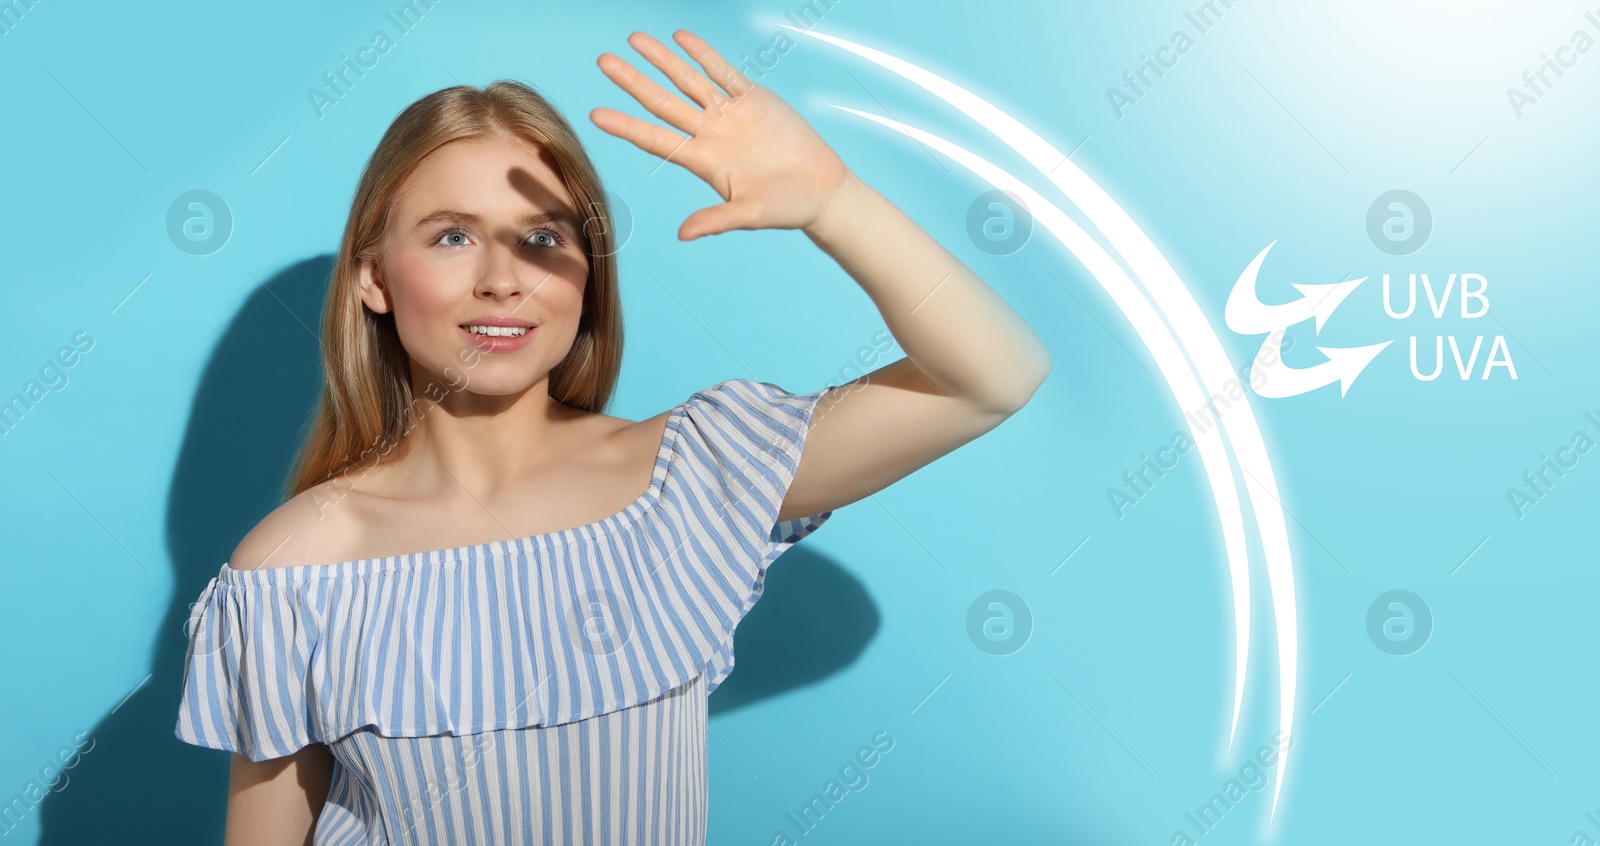 Image of Sun protection product (sunscreen) as barrier against UVA and UVB, banner design. Beautiful young woman shading herself with hand on light blue background